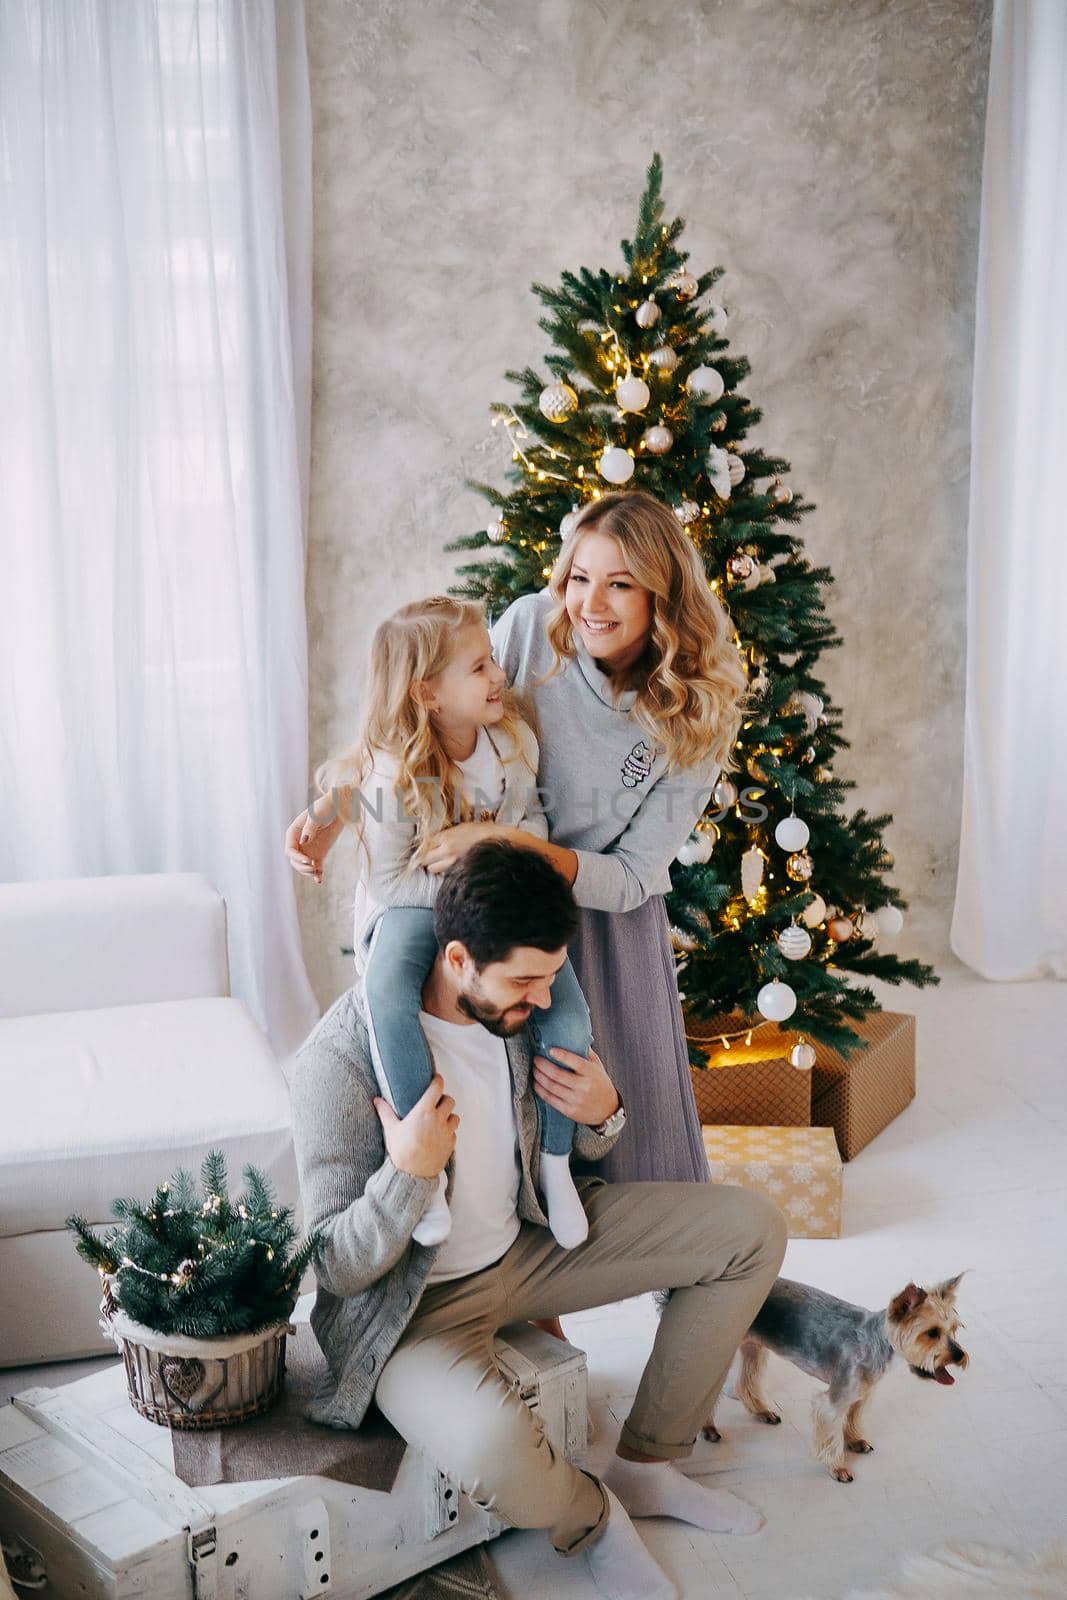 Happy family: mom, dad and pet. Family in a bright New Year's interior with a Christmas tree by Annu1tochka